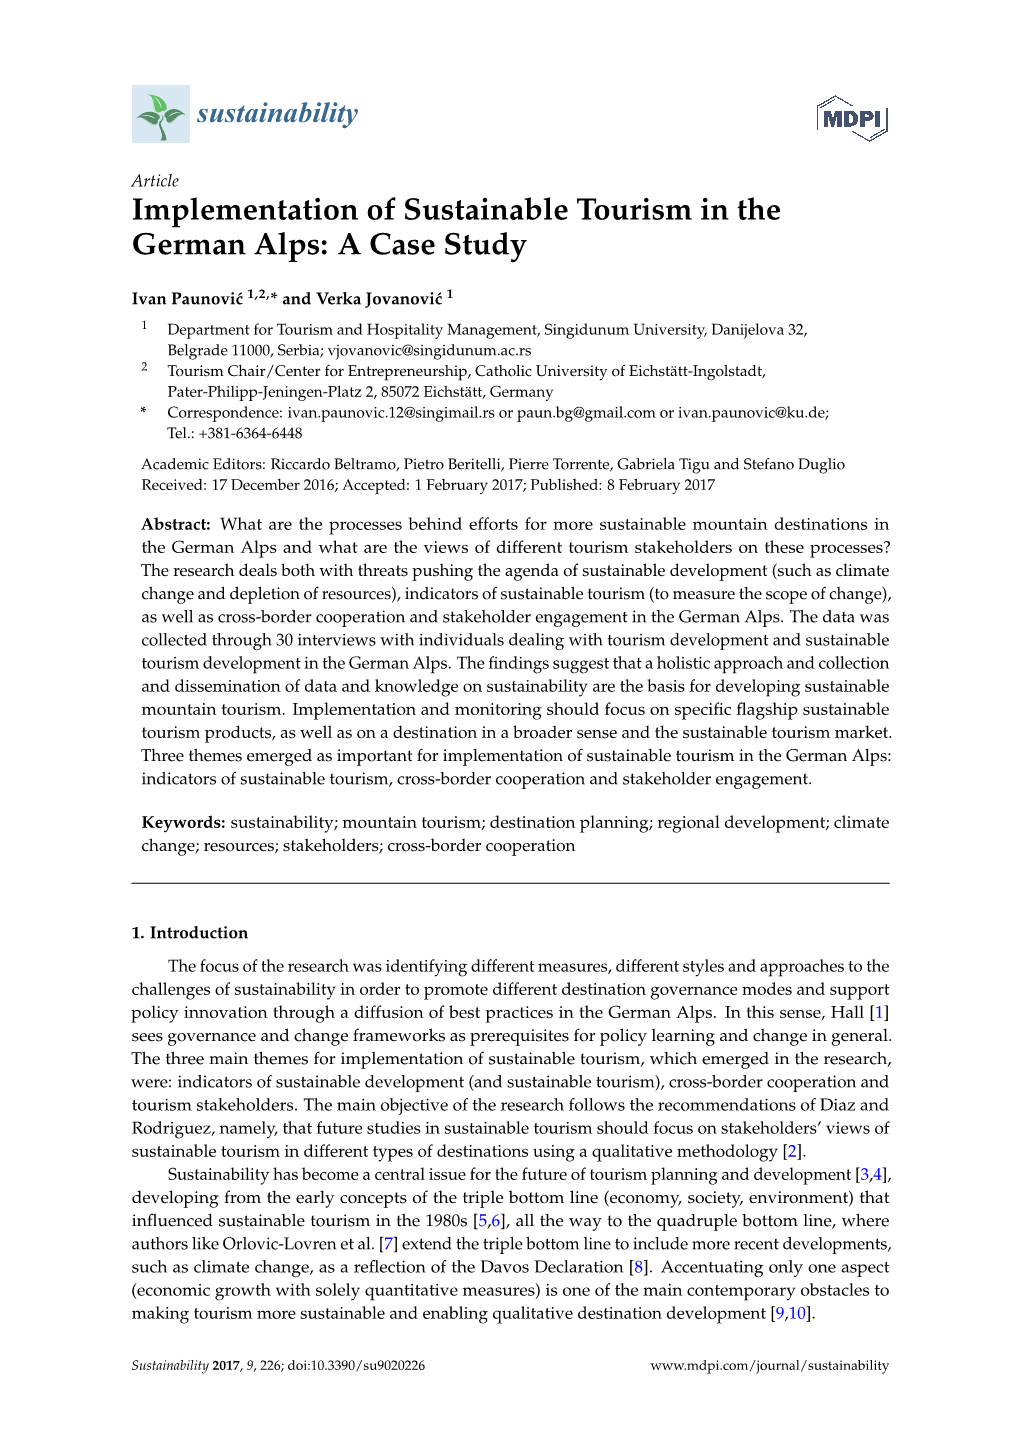 Implementation of Sustainable Tourism in the German Alps: a Case Study